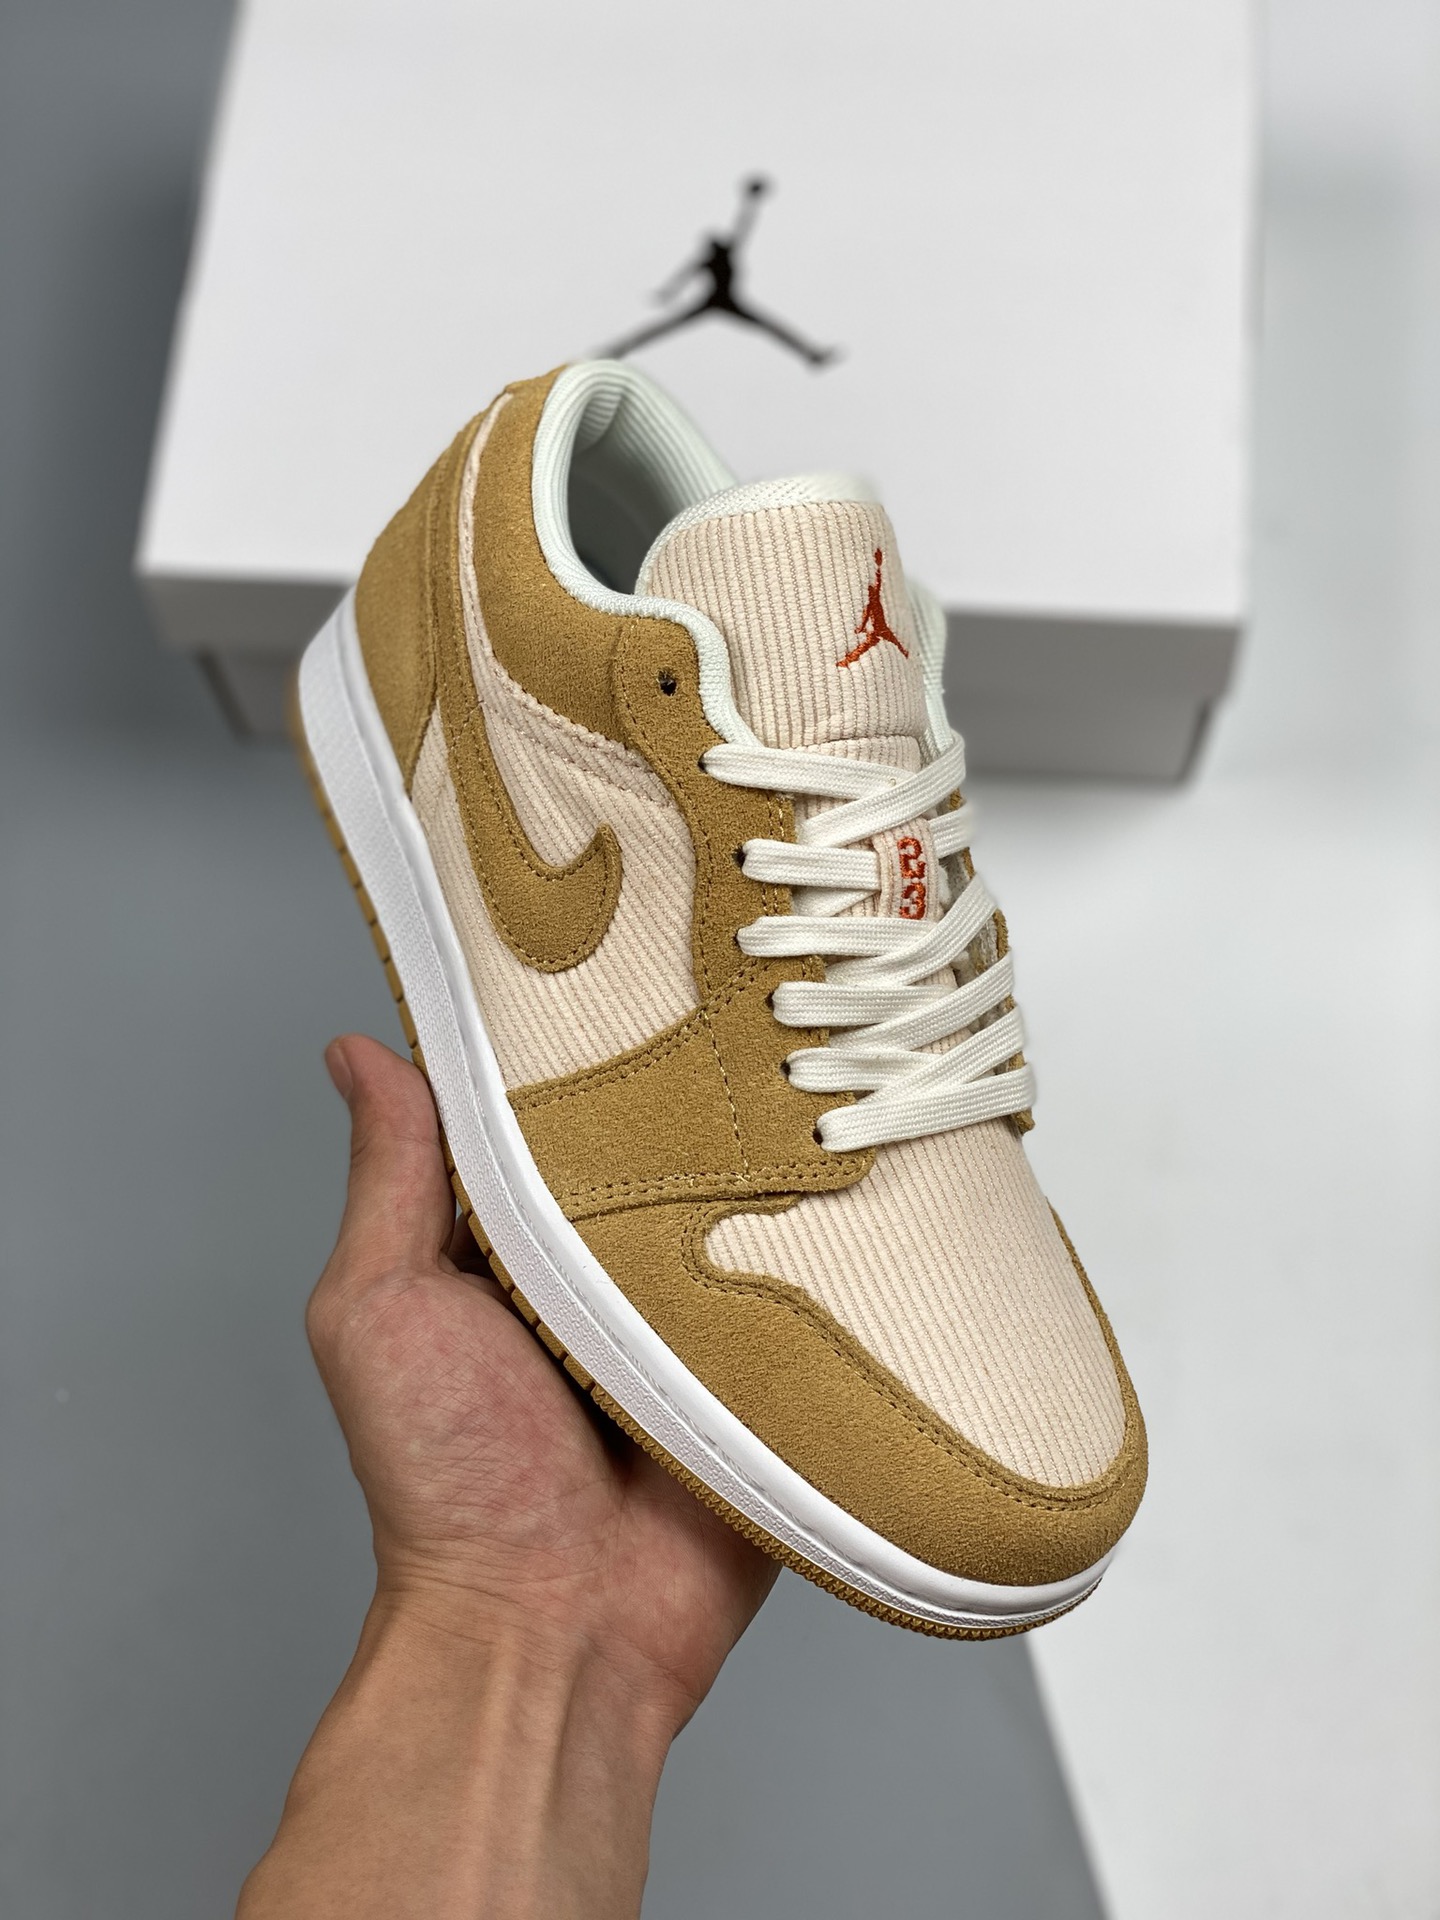 Air JD Jordan 1 Low Corduroy and Suede DH7820-700 Shoes